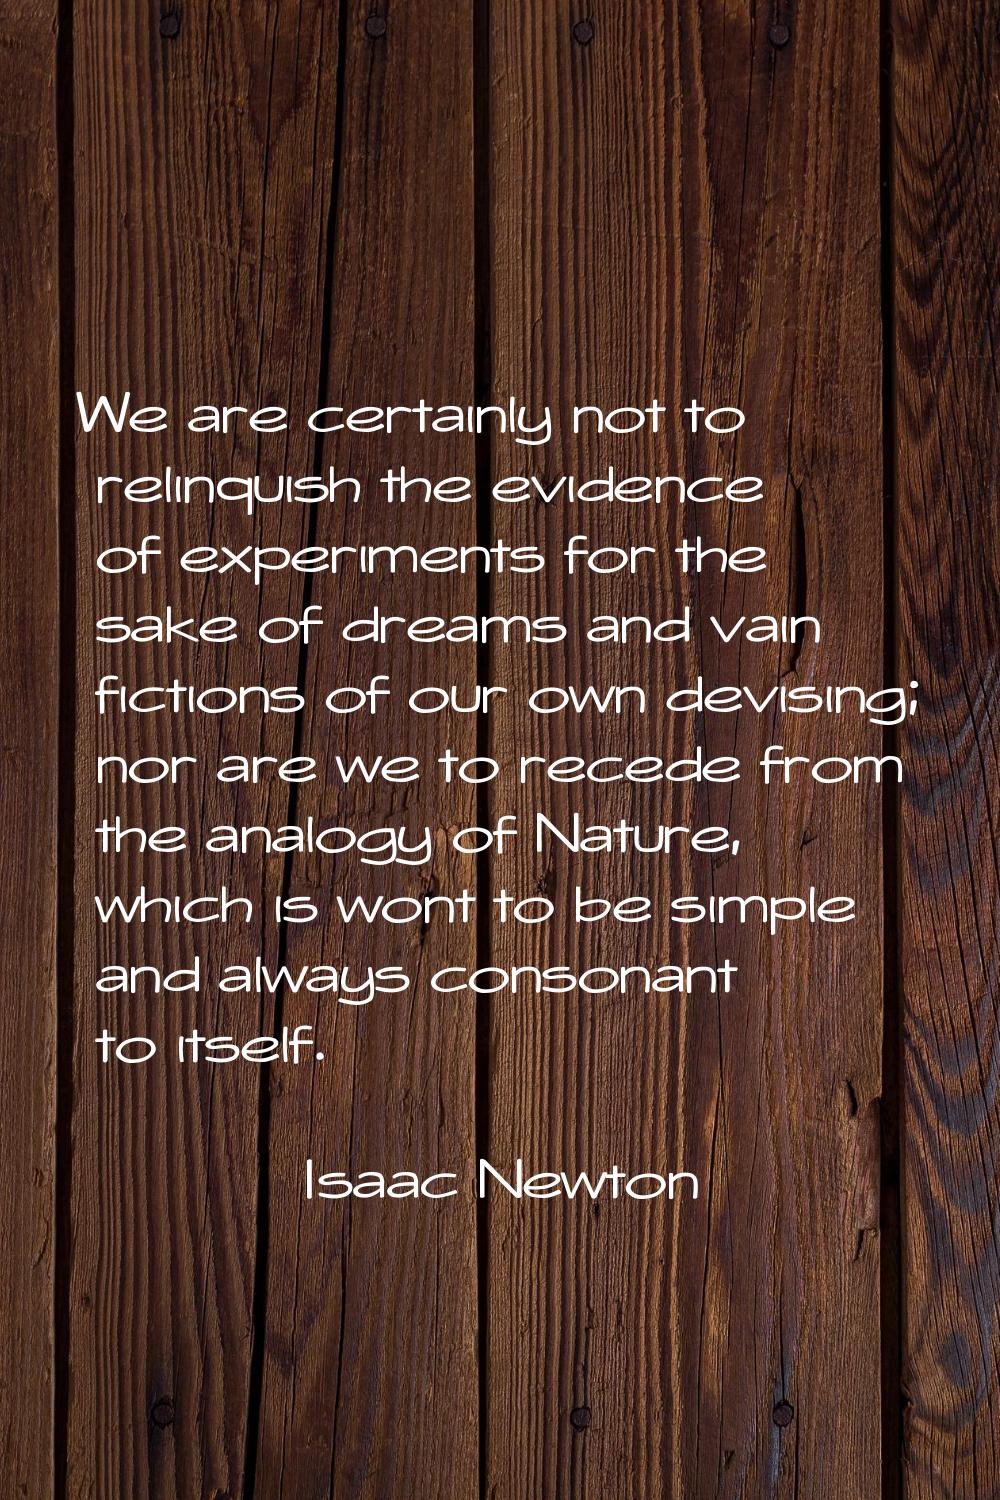 We are certainly not to relinquish the evidence of experiments for the sake of dreams and vain fict